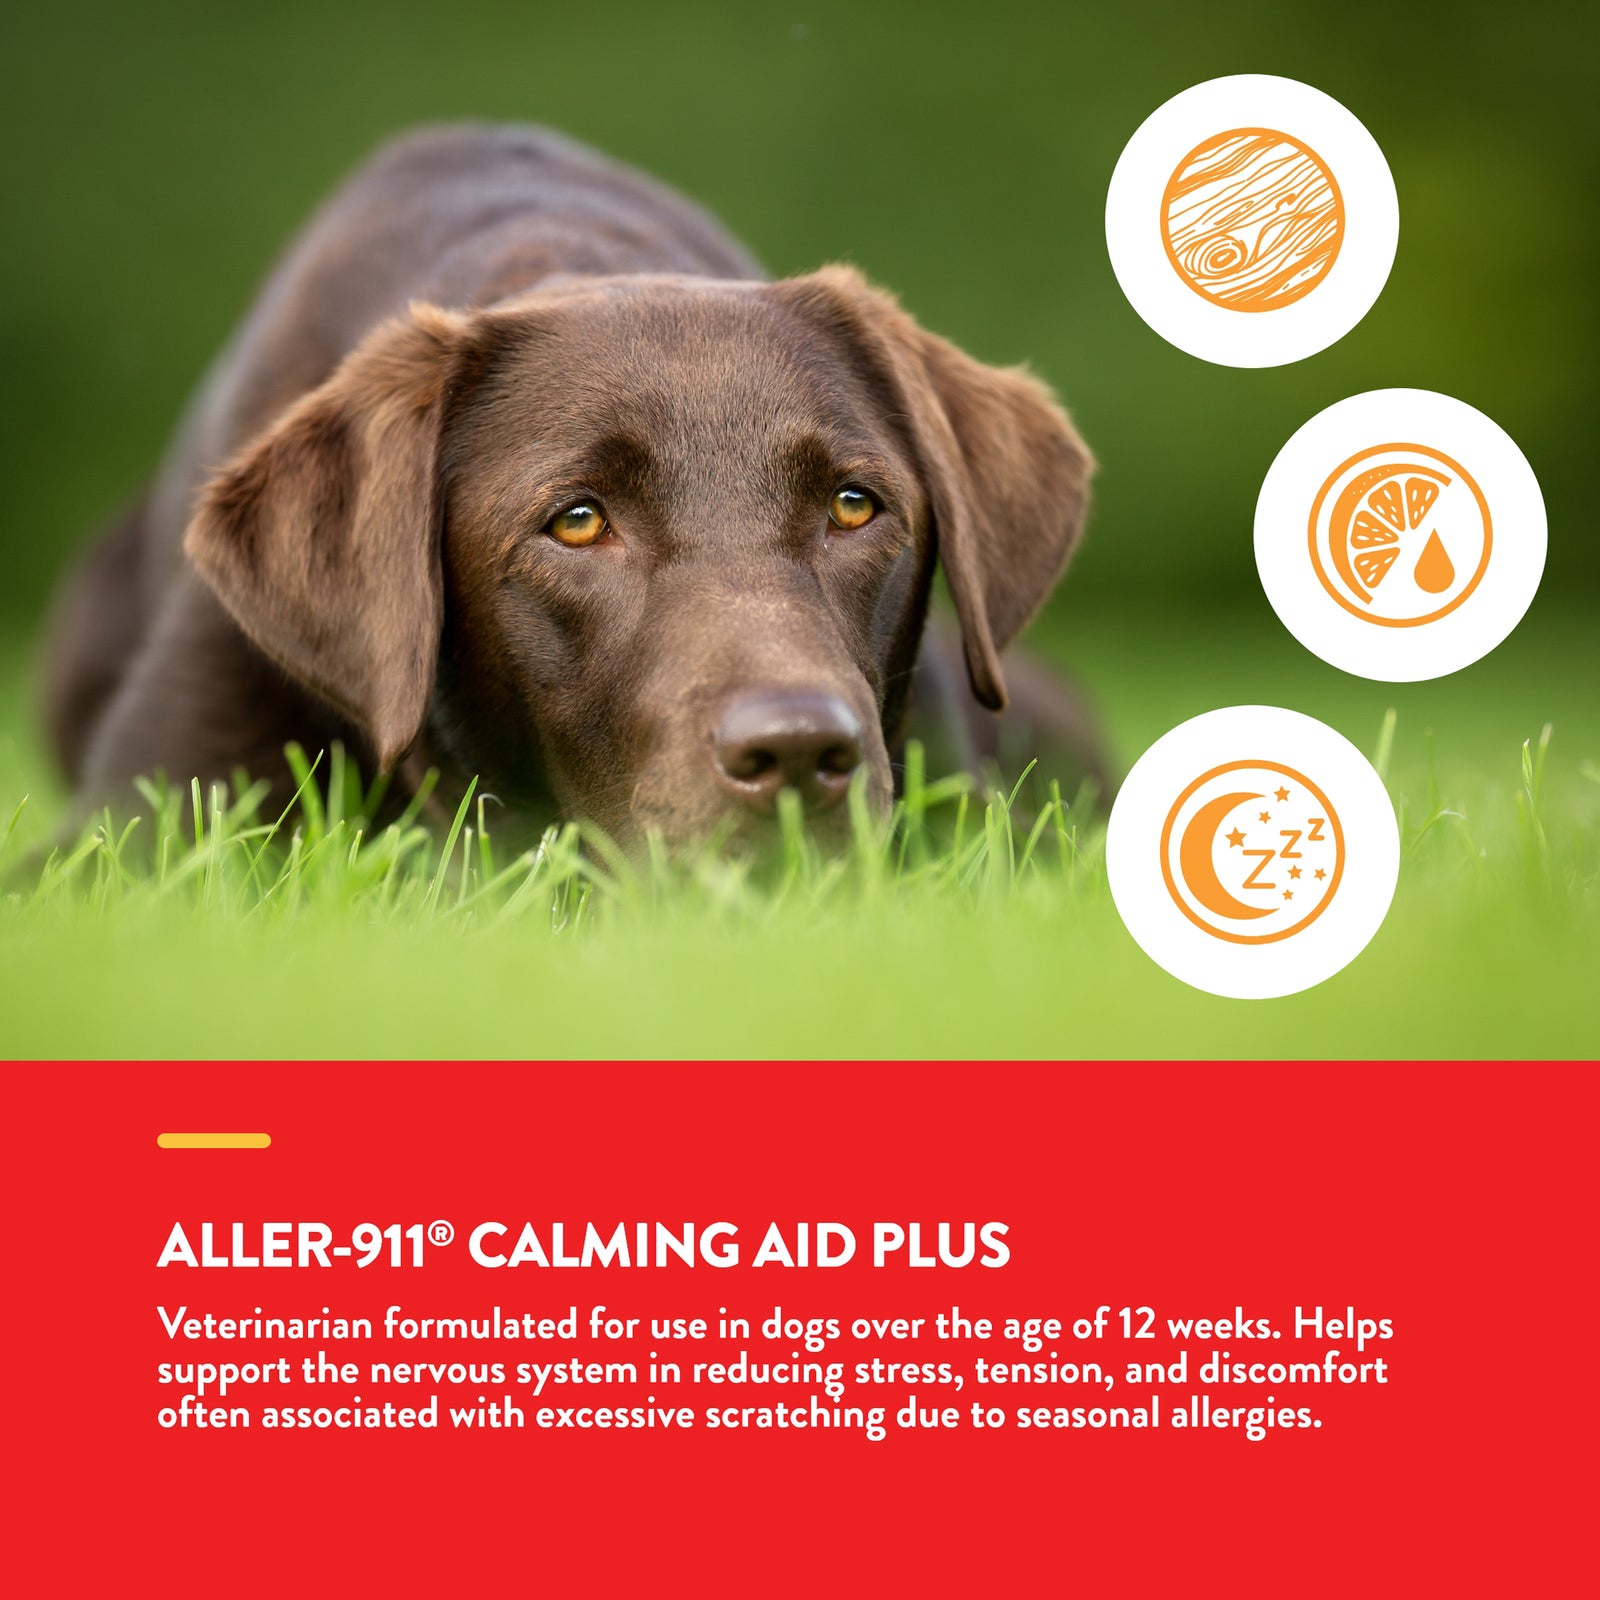 NaturVet Aller911 Calming Aid Plus Allergy Aid Chewable Tabs for Dogs